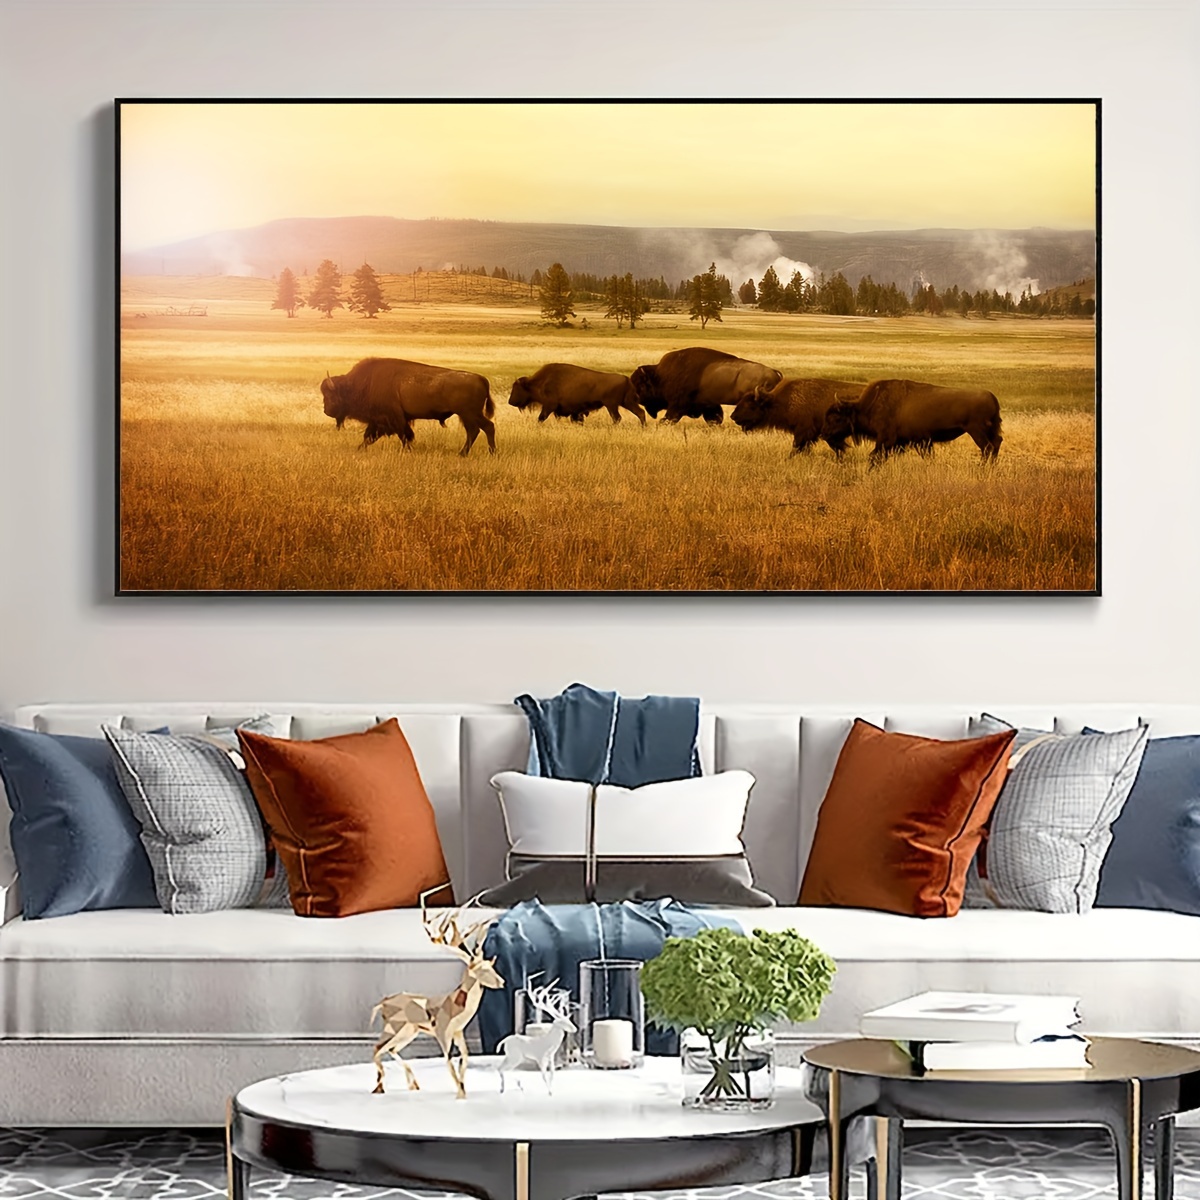 

1pc Unframed Canvas Poster, Modern Art, Animals Consume Cattle Wall Art, Ideal Gift For Bedroom Living Room Corridor, Wall Art, Wall Decor, Winter Decor, Room Decoration